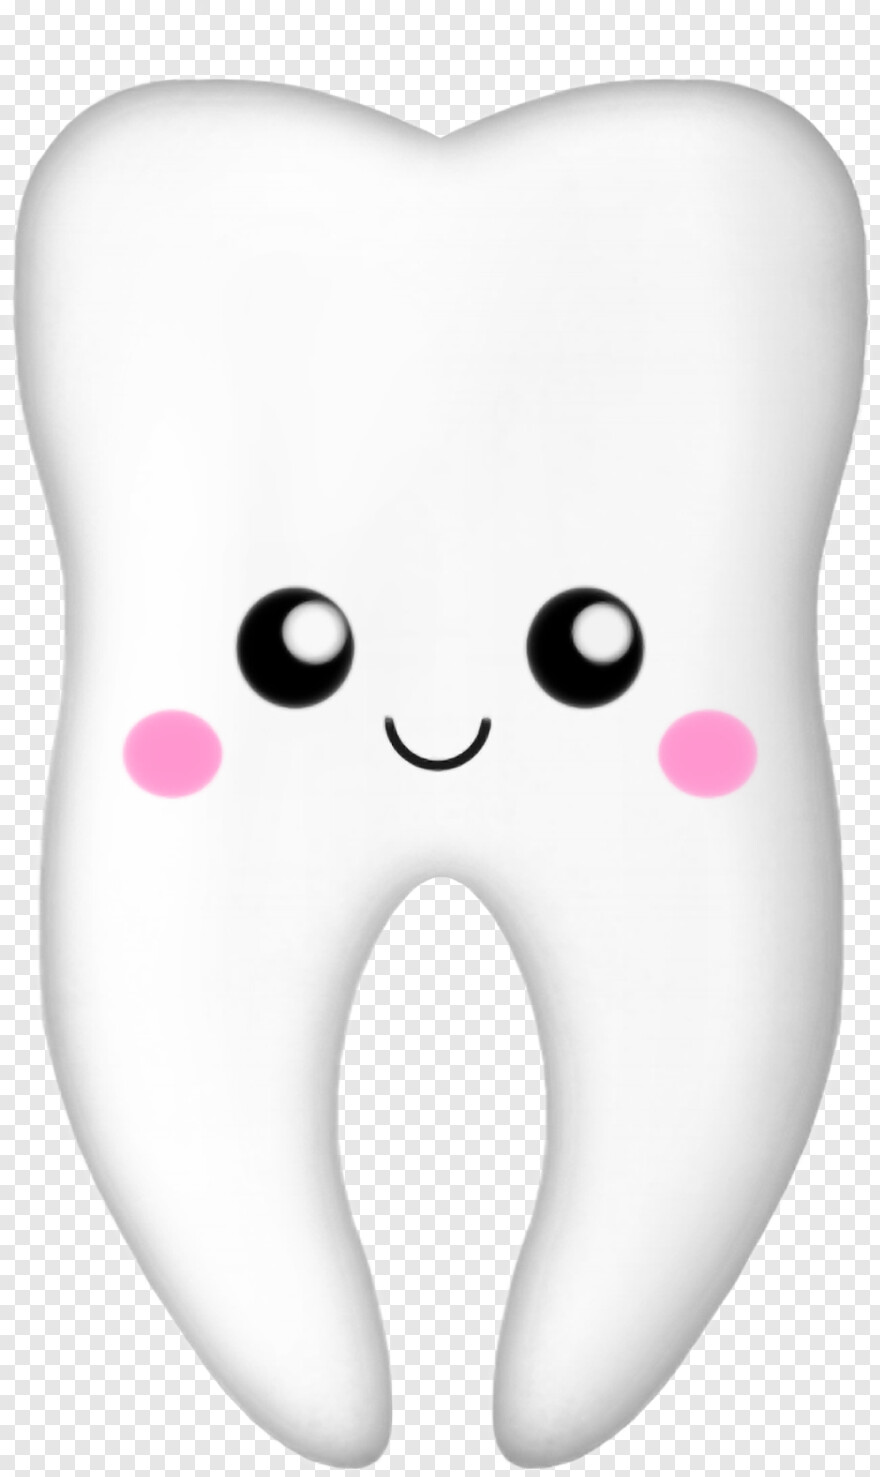  Tooth Outline, Tooth, Tooth Brush, Tooth Icon, Tooth Clipart, Dentist